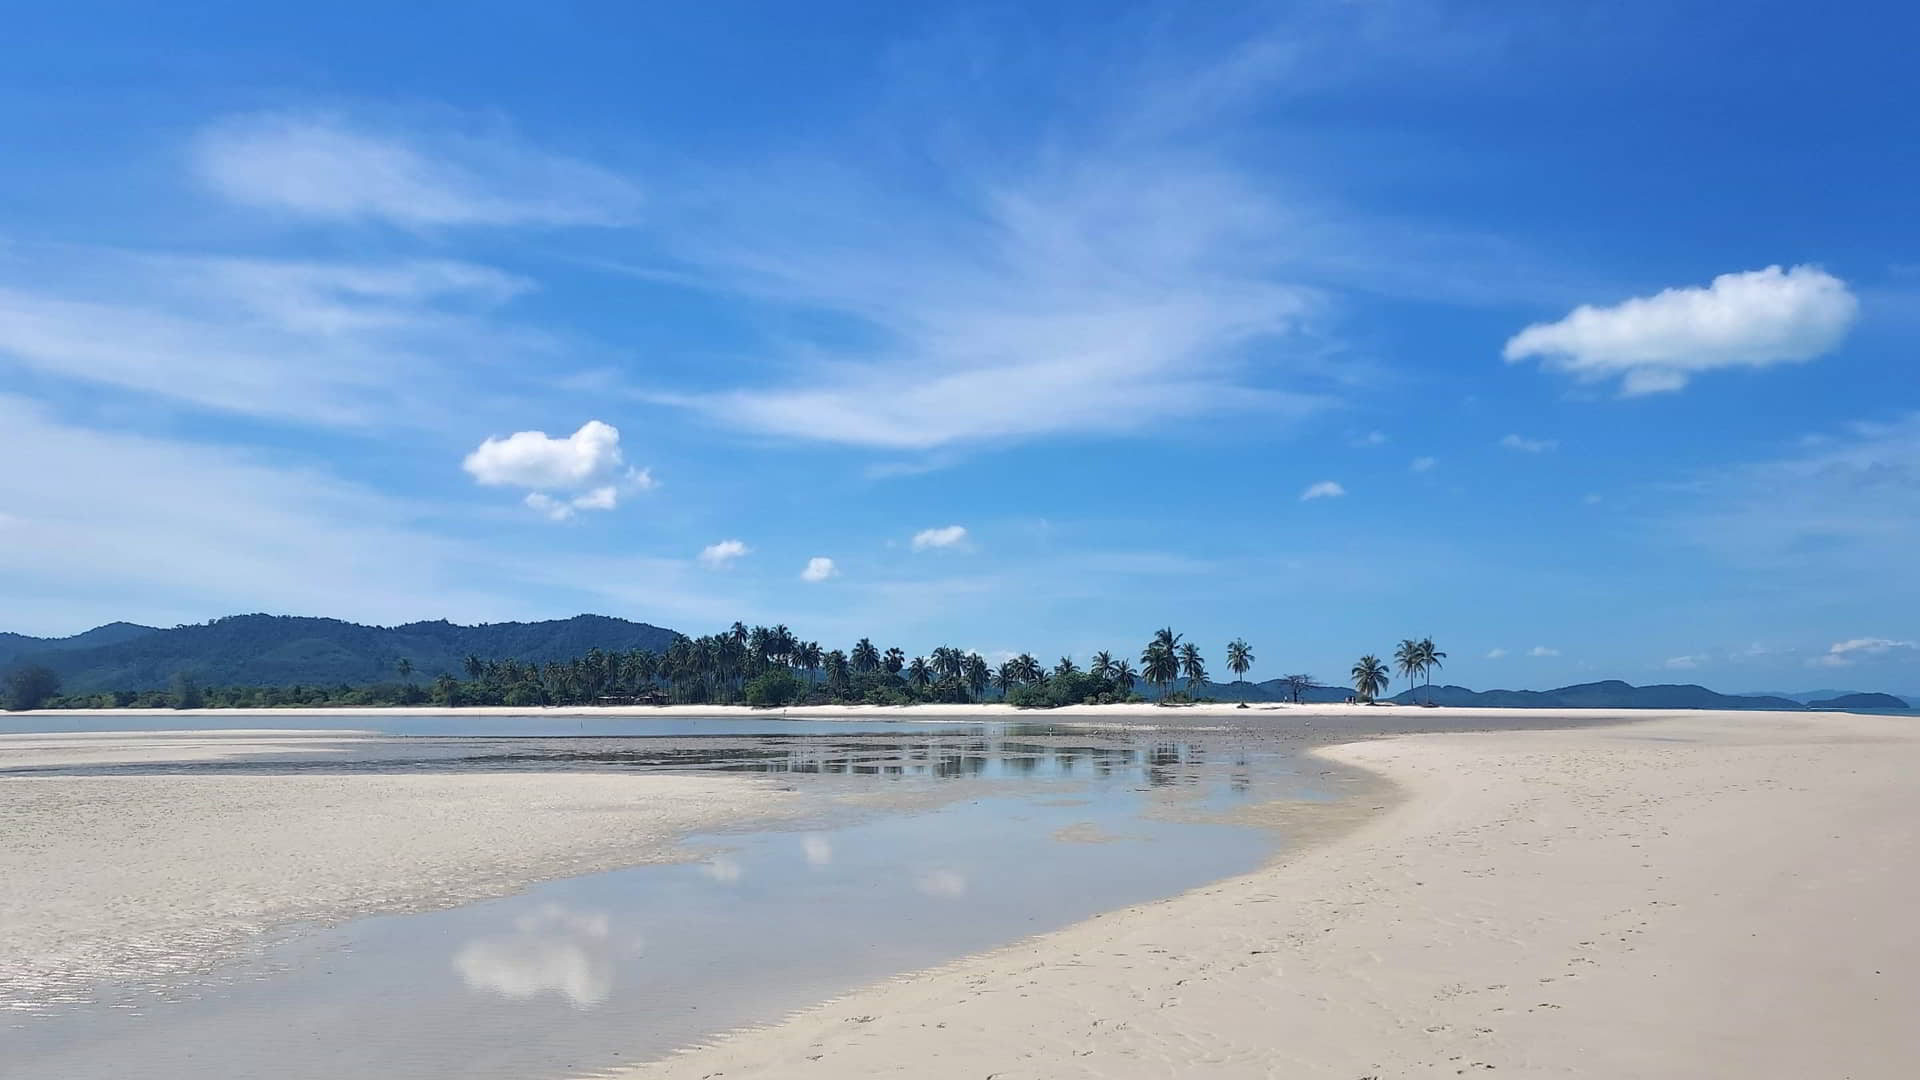 Koh Yao Yai: The Complete Travel Guide